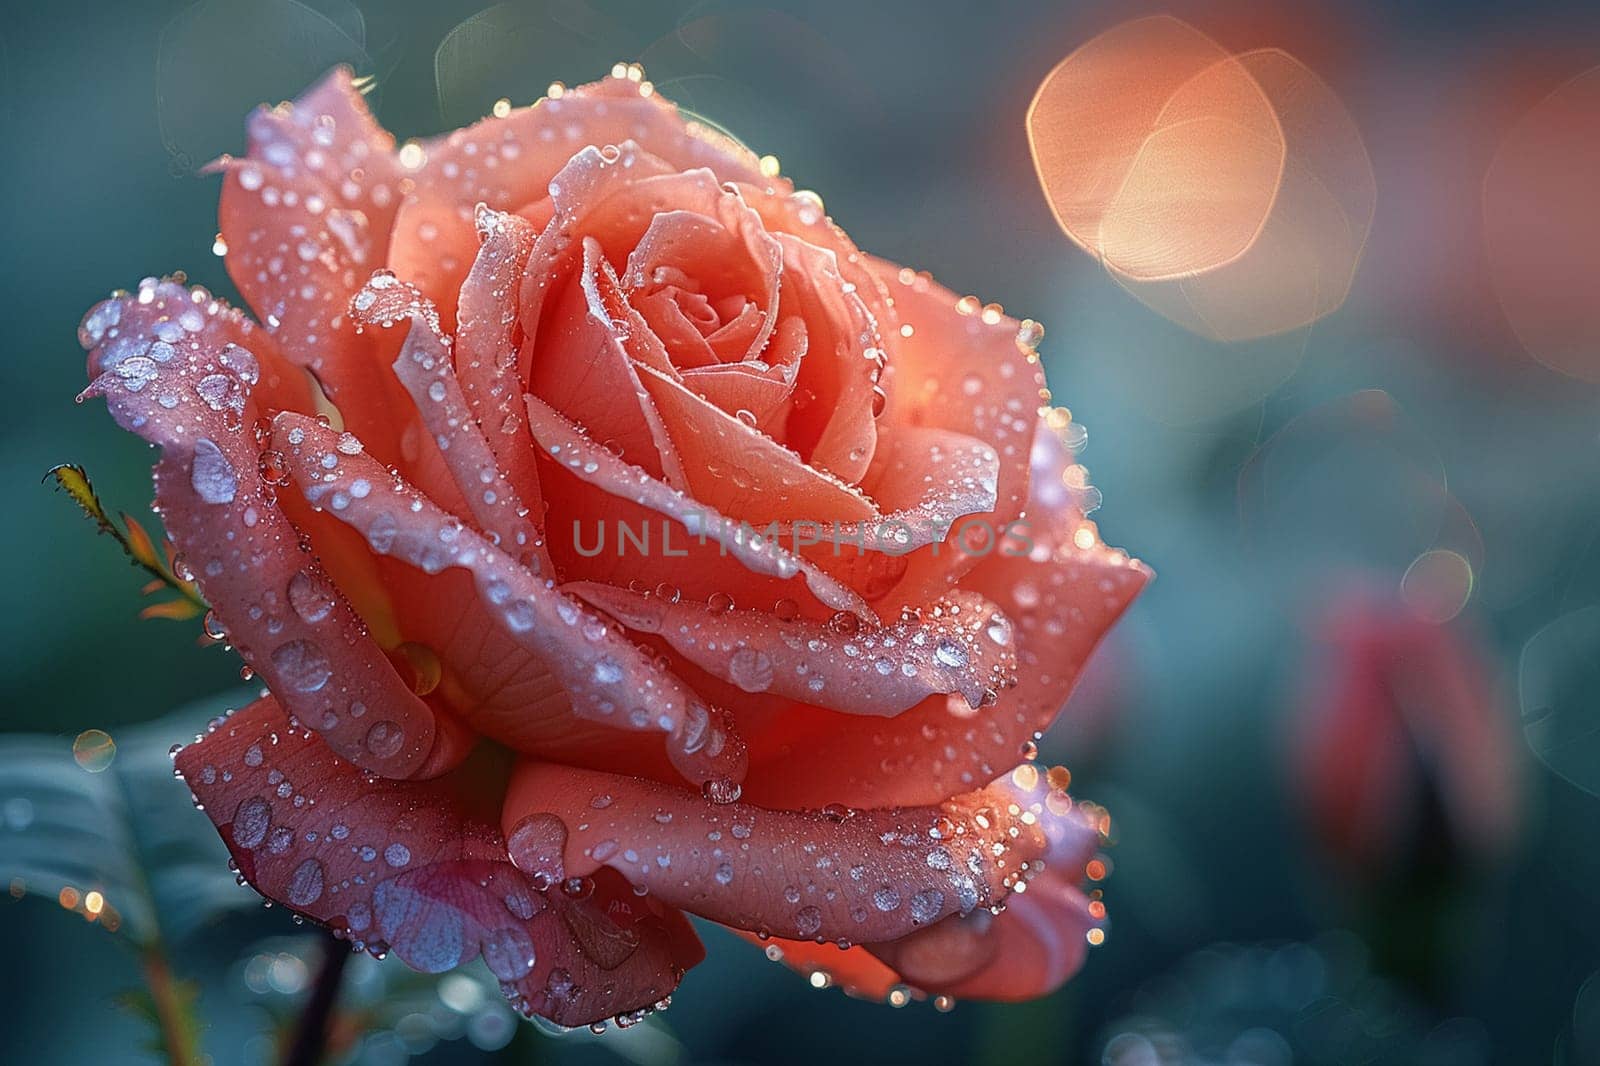 Soft Petals of a Blooming Rose in the Morning Dew, The colors blur into freshness, nature's delicate unfolding.